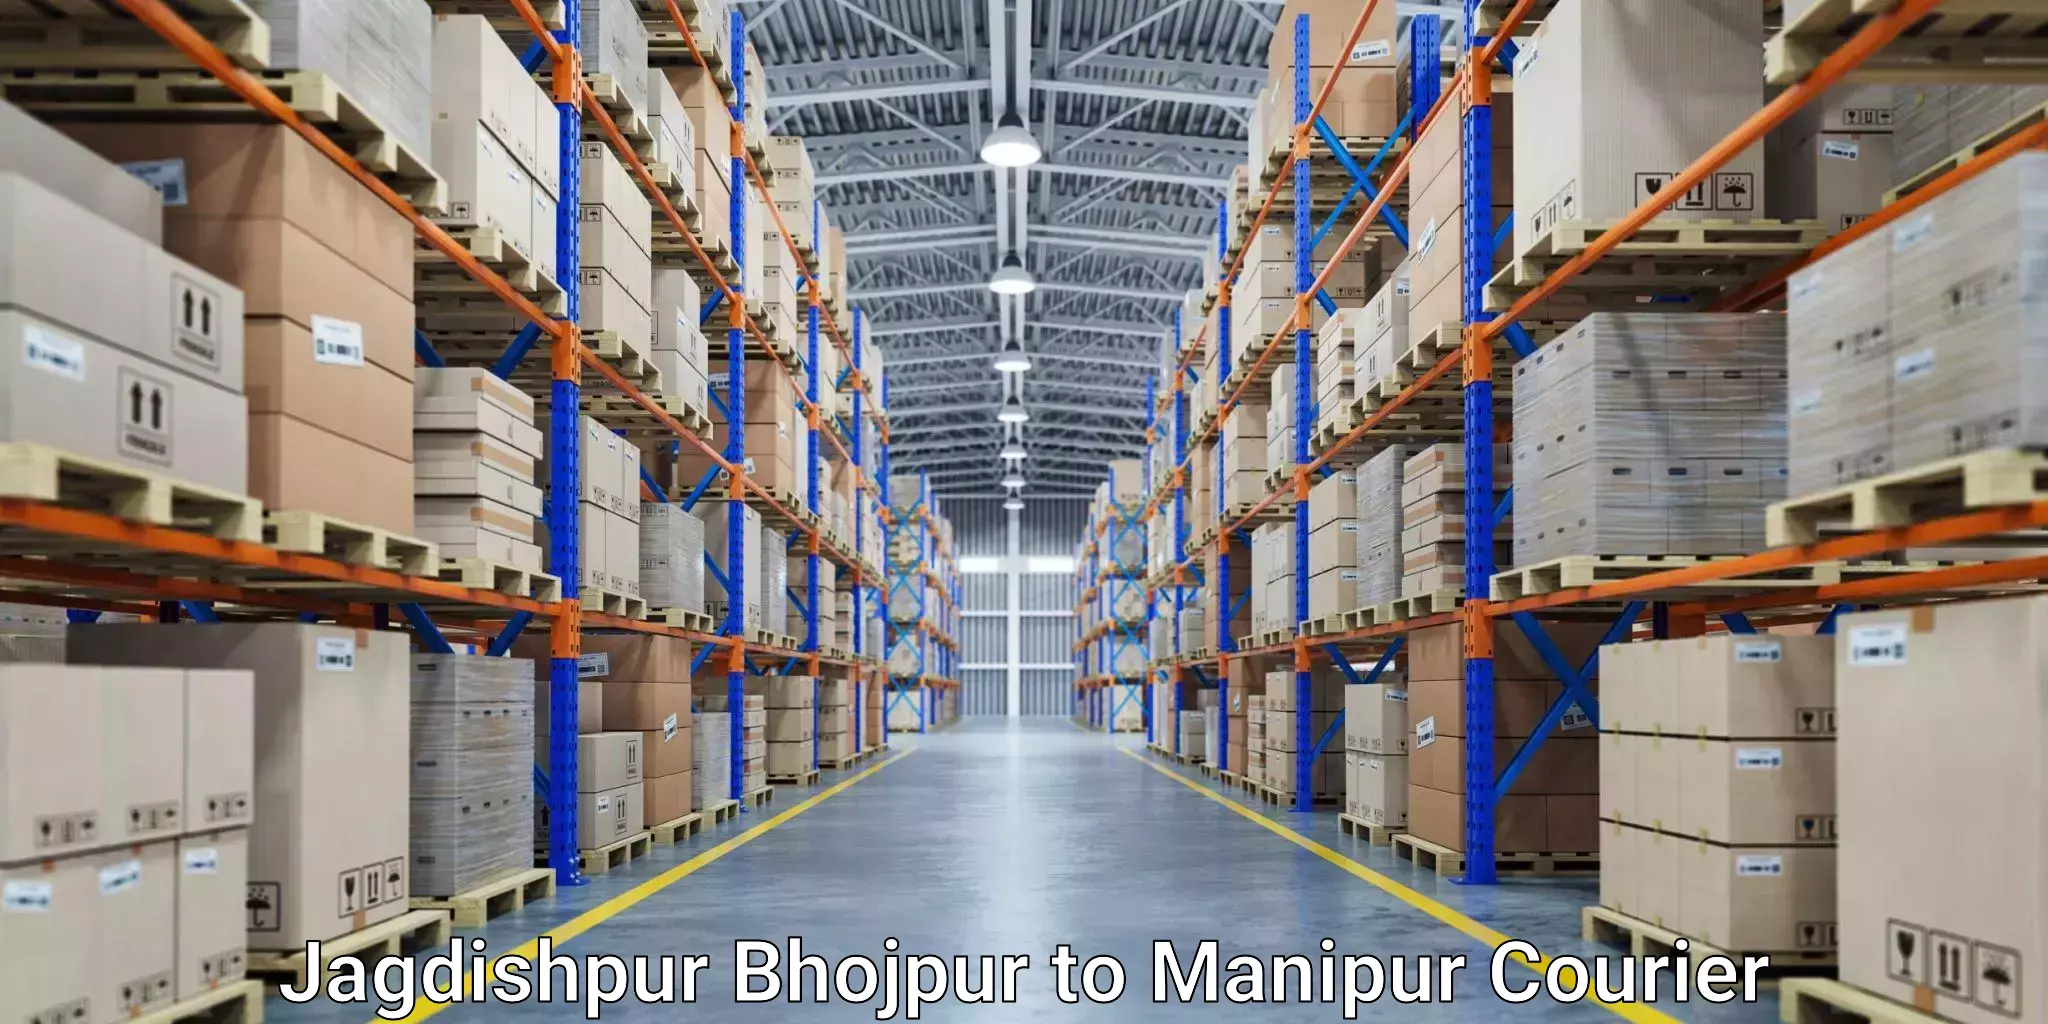 Courier service efficiency Jagdishpur Bhojpur to Imphal